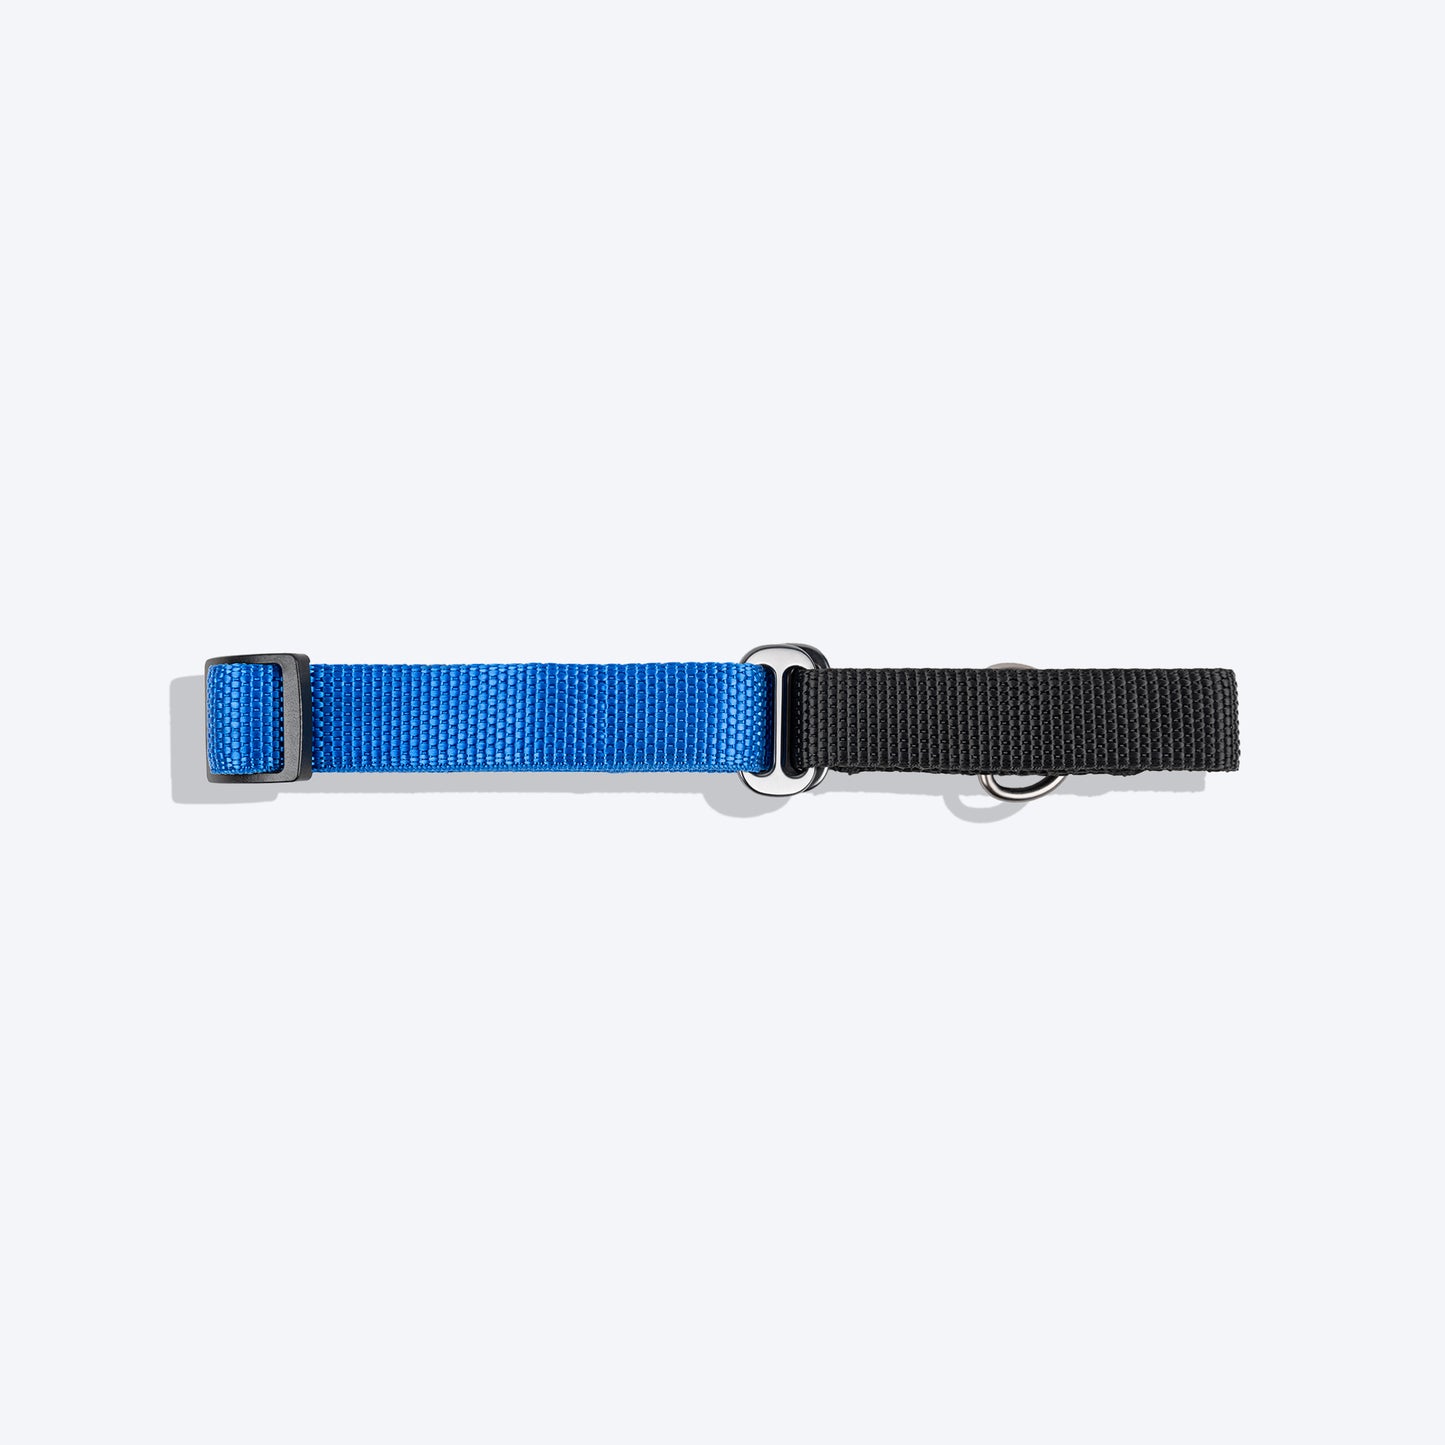 HUFT Martingale Collar For Dog - Cobalt Blue & Classic Black - Heads Up For Tails